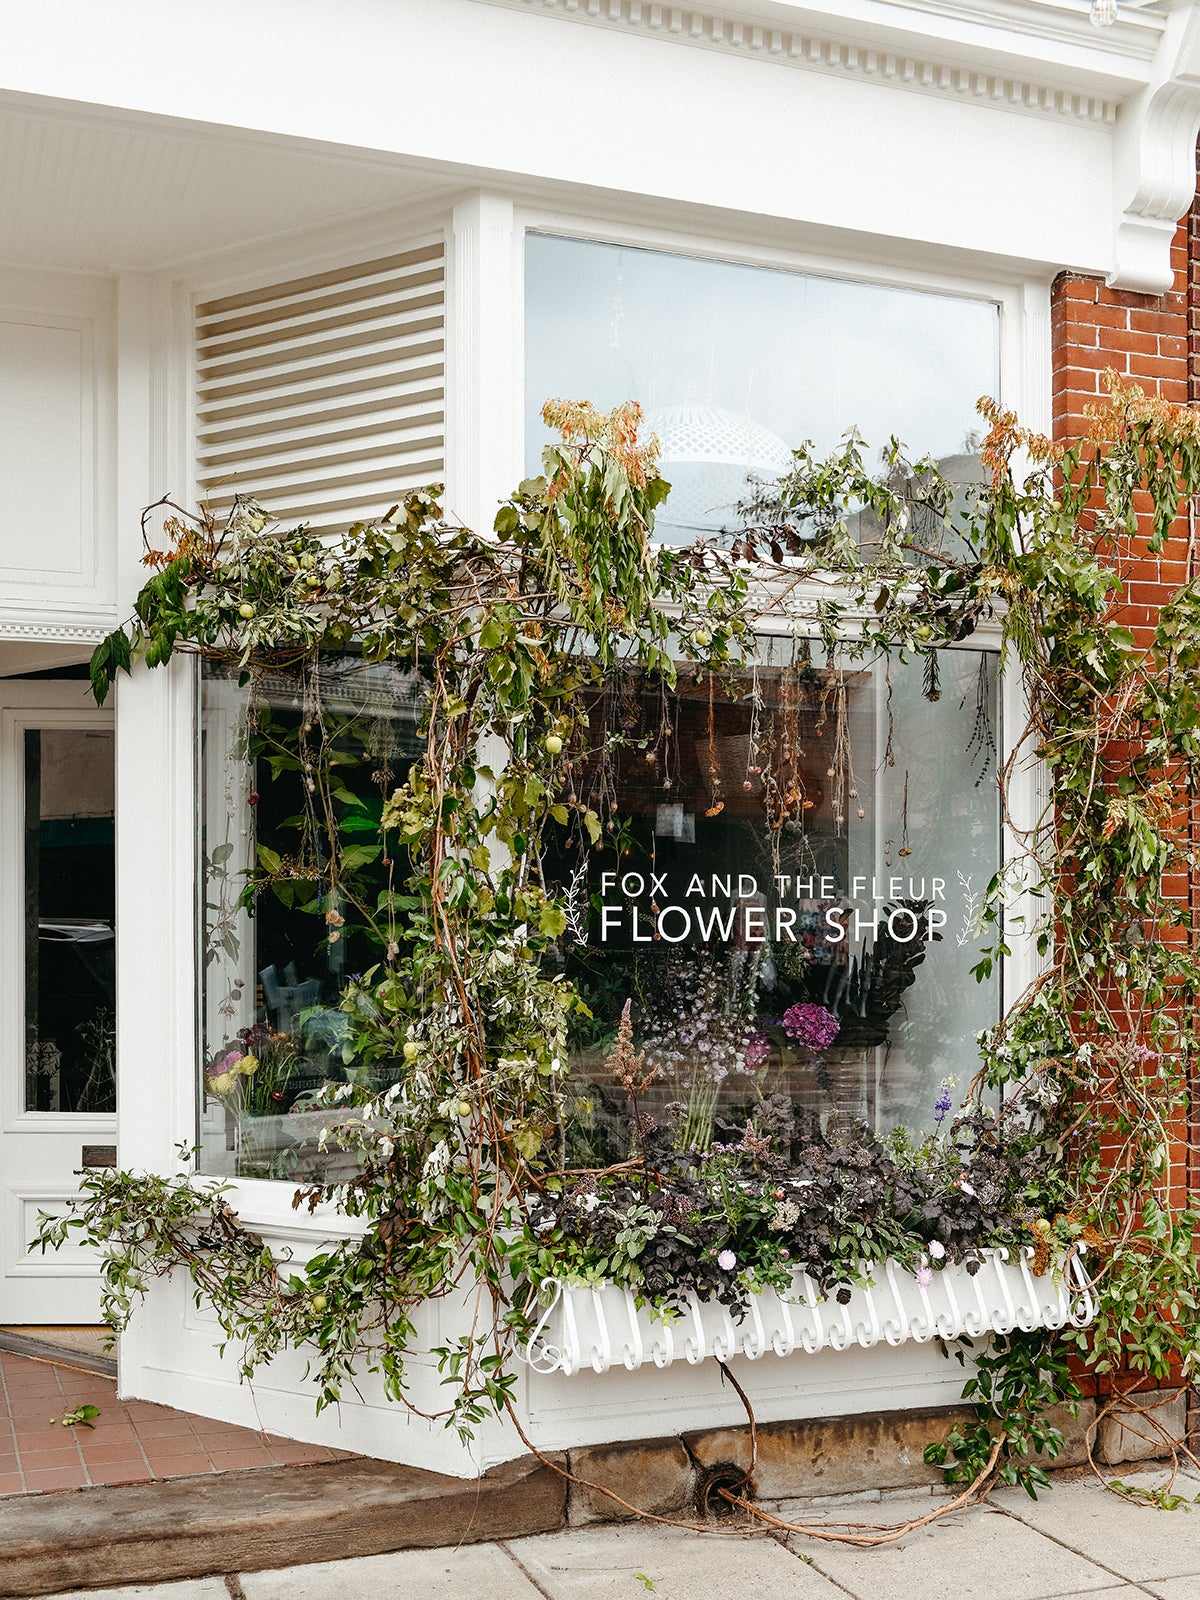 Exterior window of Fox and the Fleur flower shop